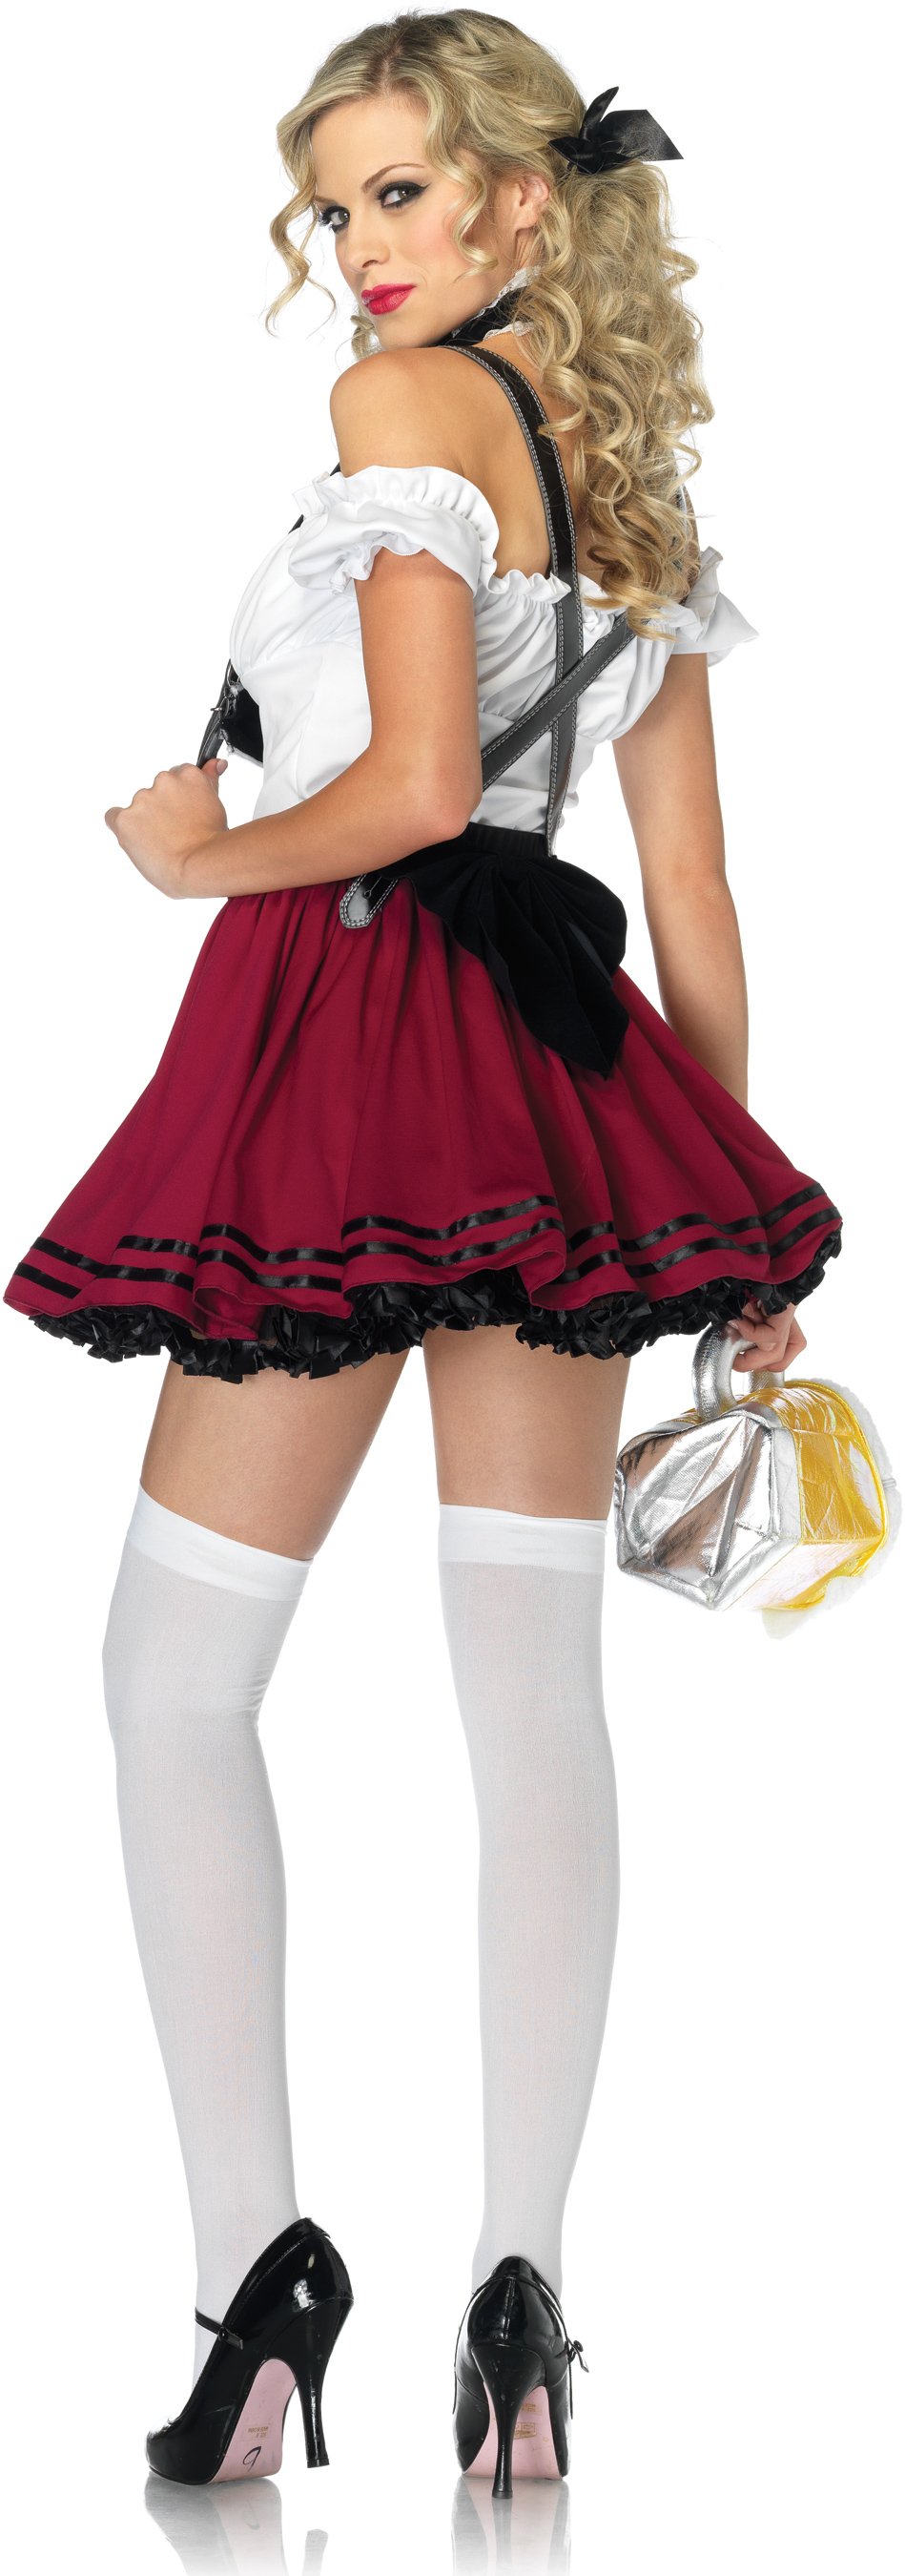 Beer Stein Beauty Adult Costume - Click Image to Close